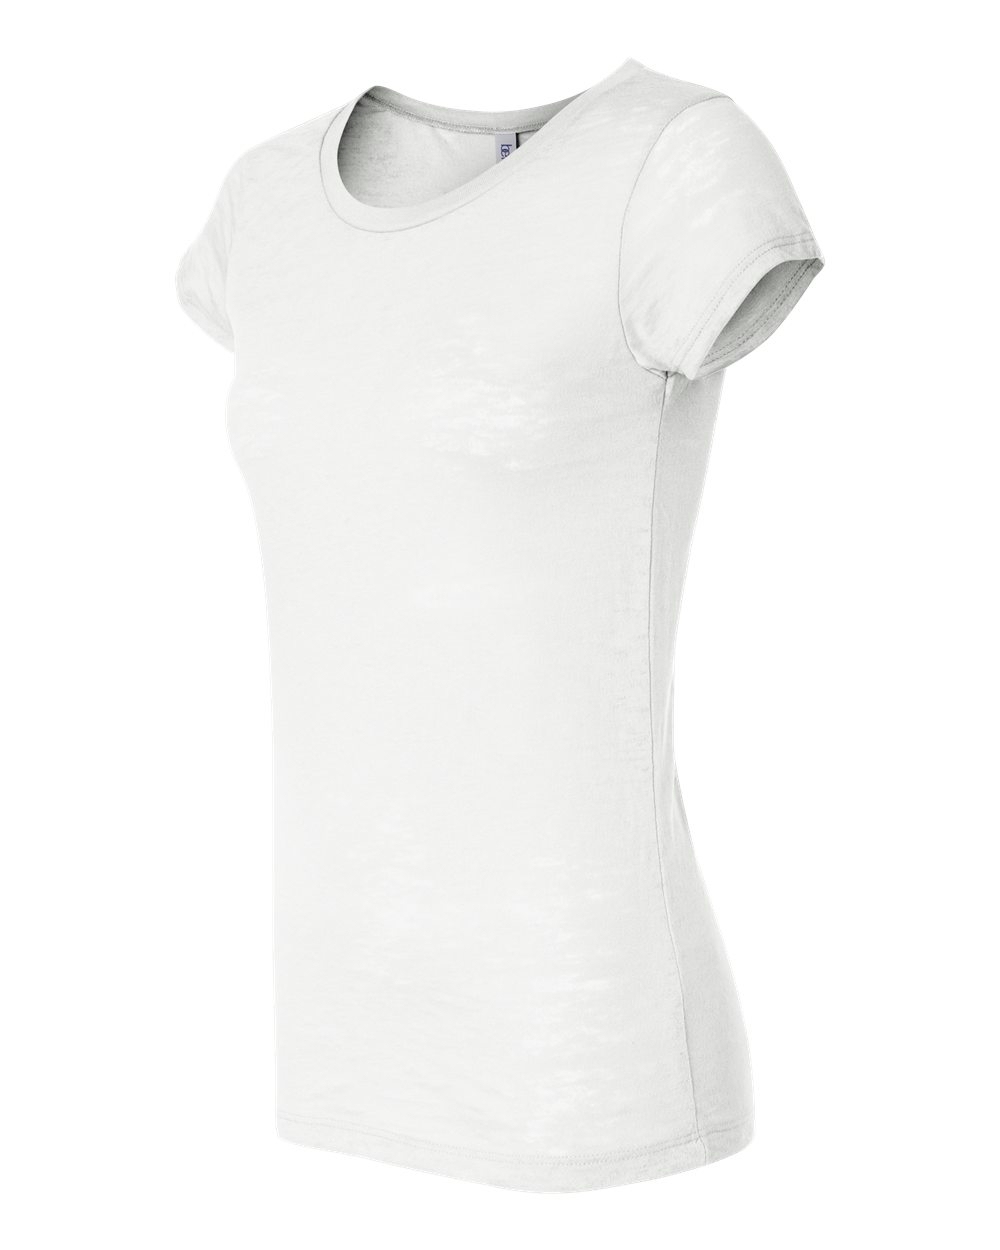 Bella + Canvas Ladies' Burnout T-Shirt Embroidery Blanks - WHITE